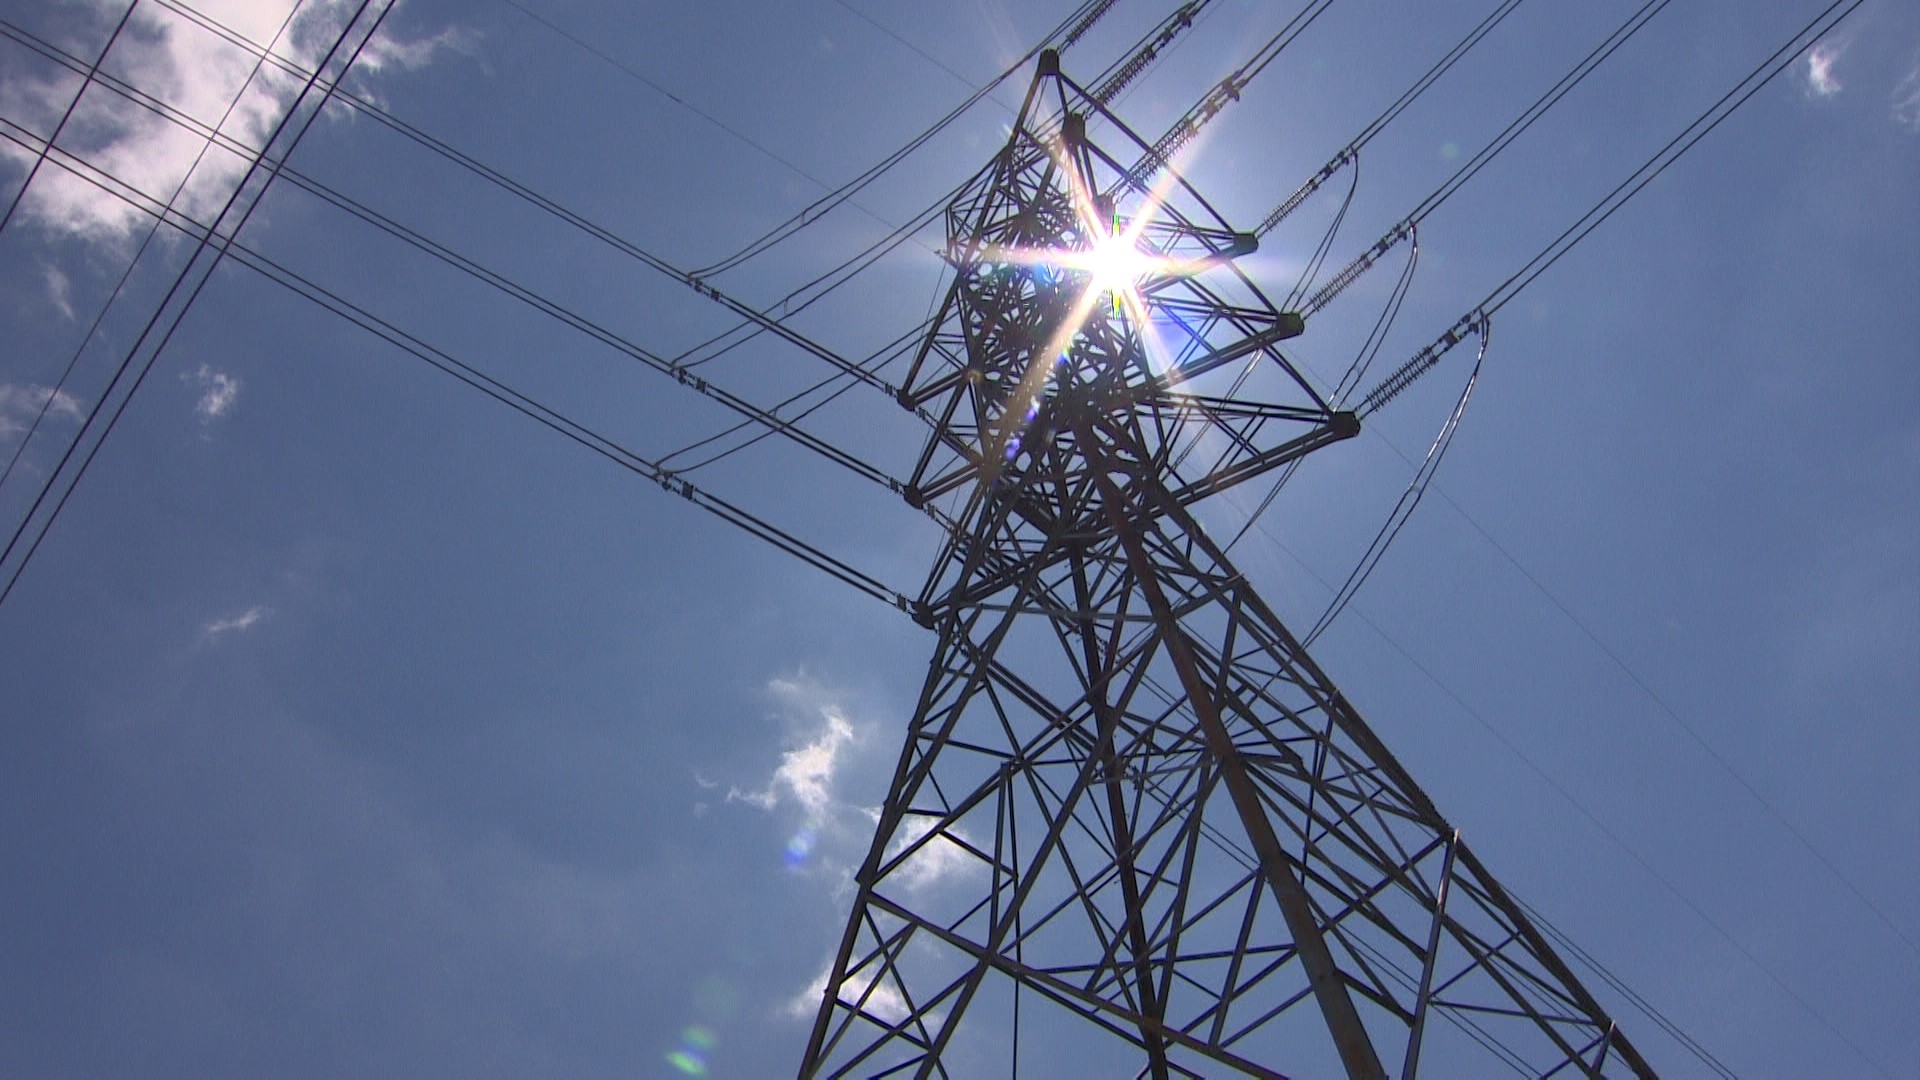 Under normal conditions, ERCOT said the grid would hold up, but in extreme risk scenarios, there would not be enough power to go around this fall.